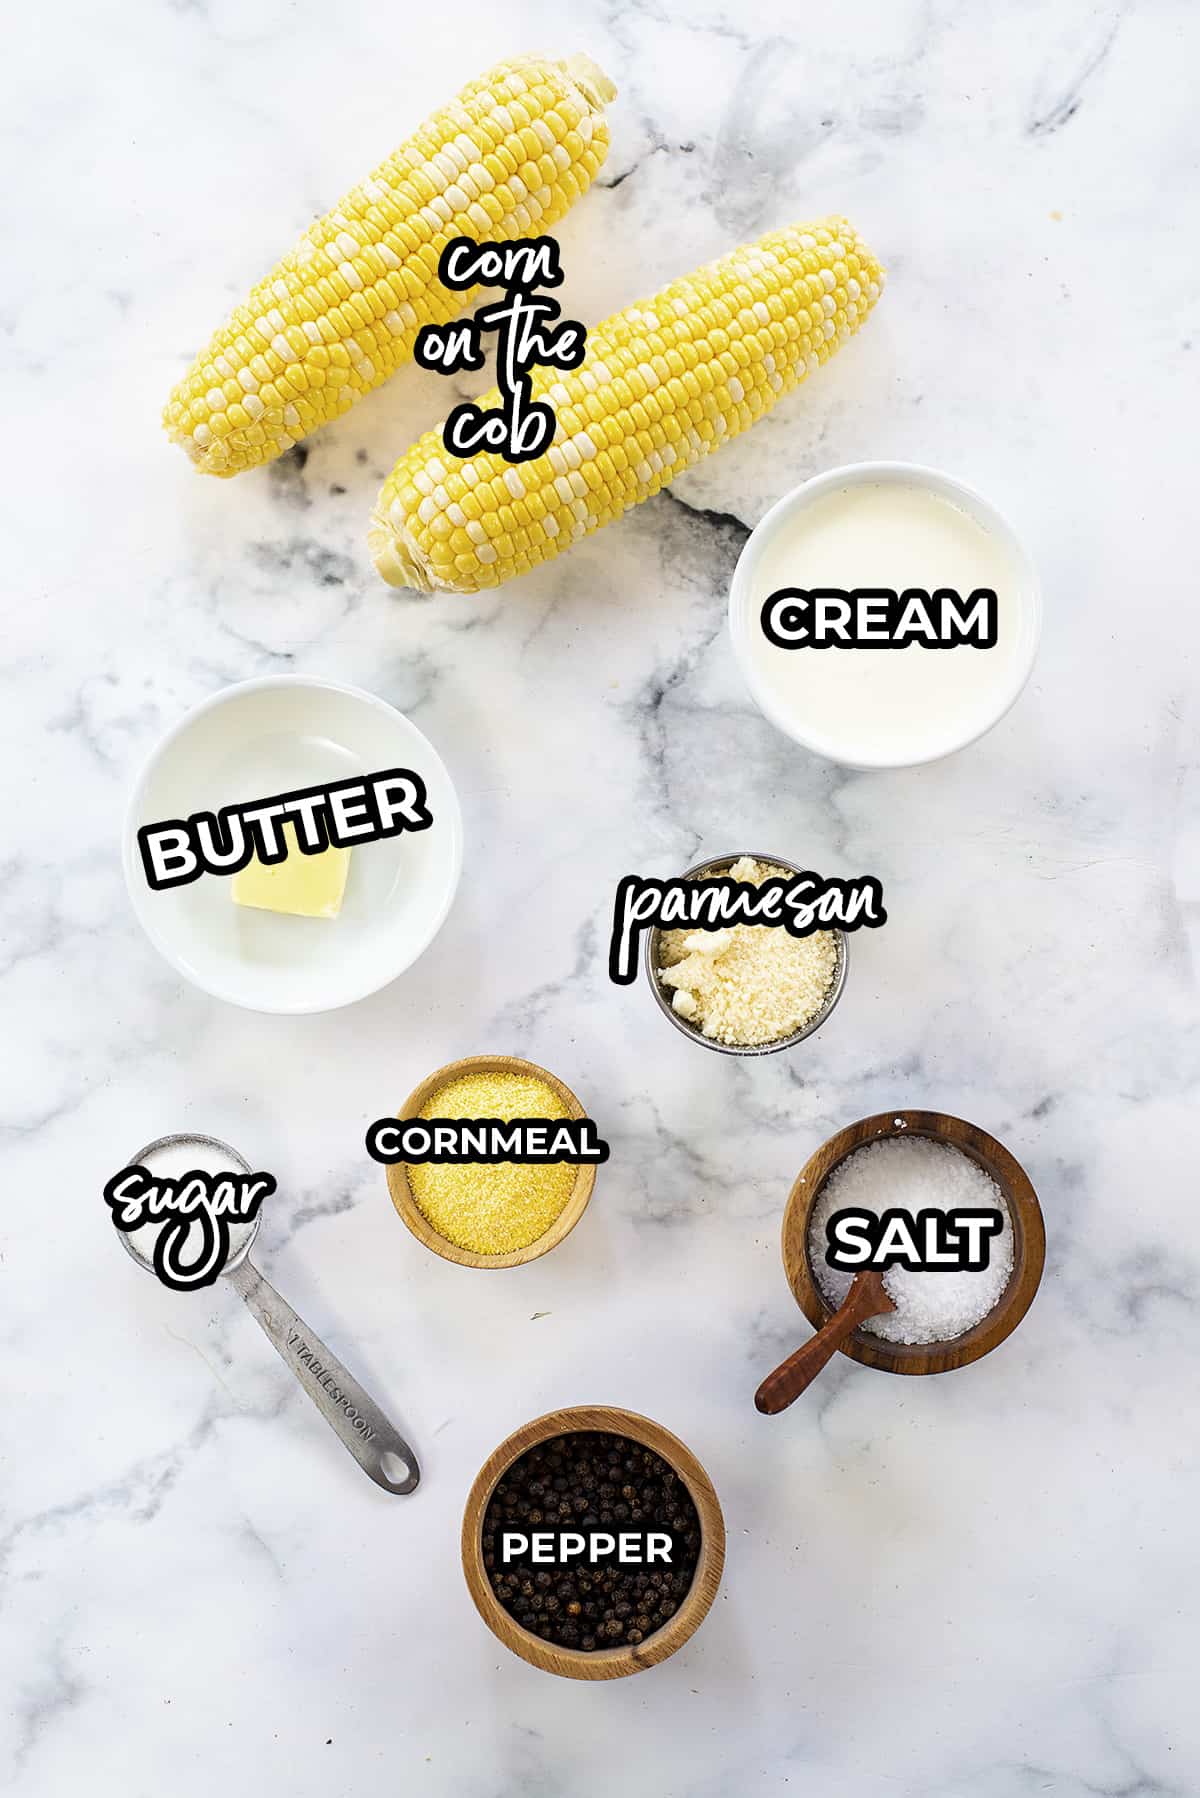 Ingredients for creamed corn.